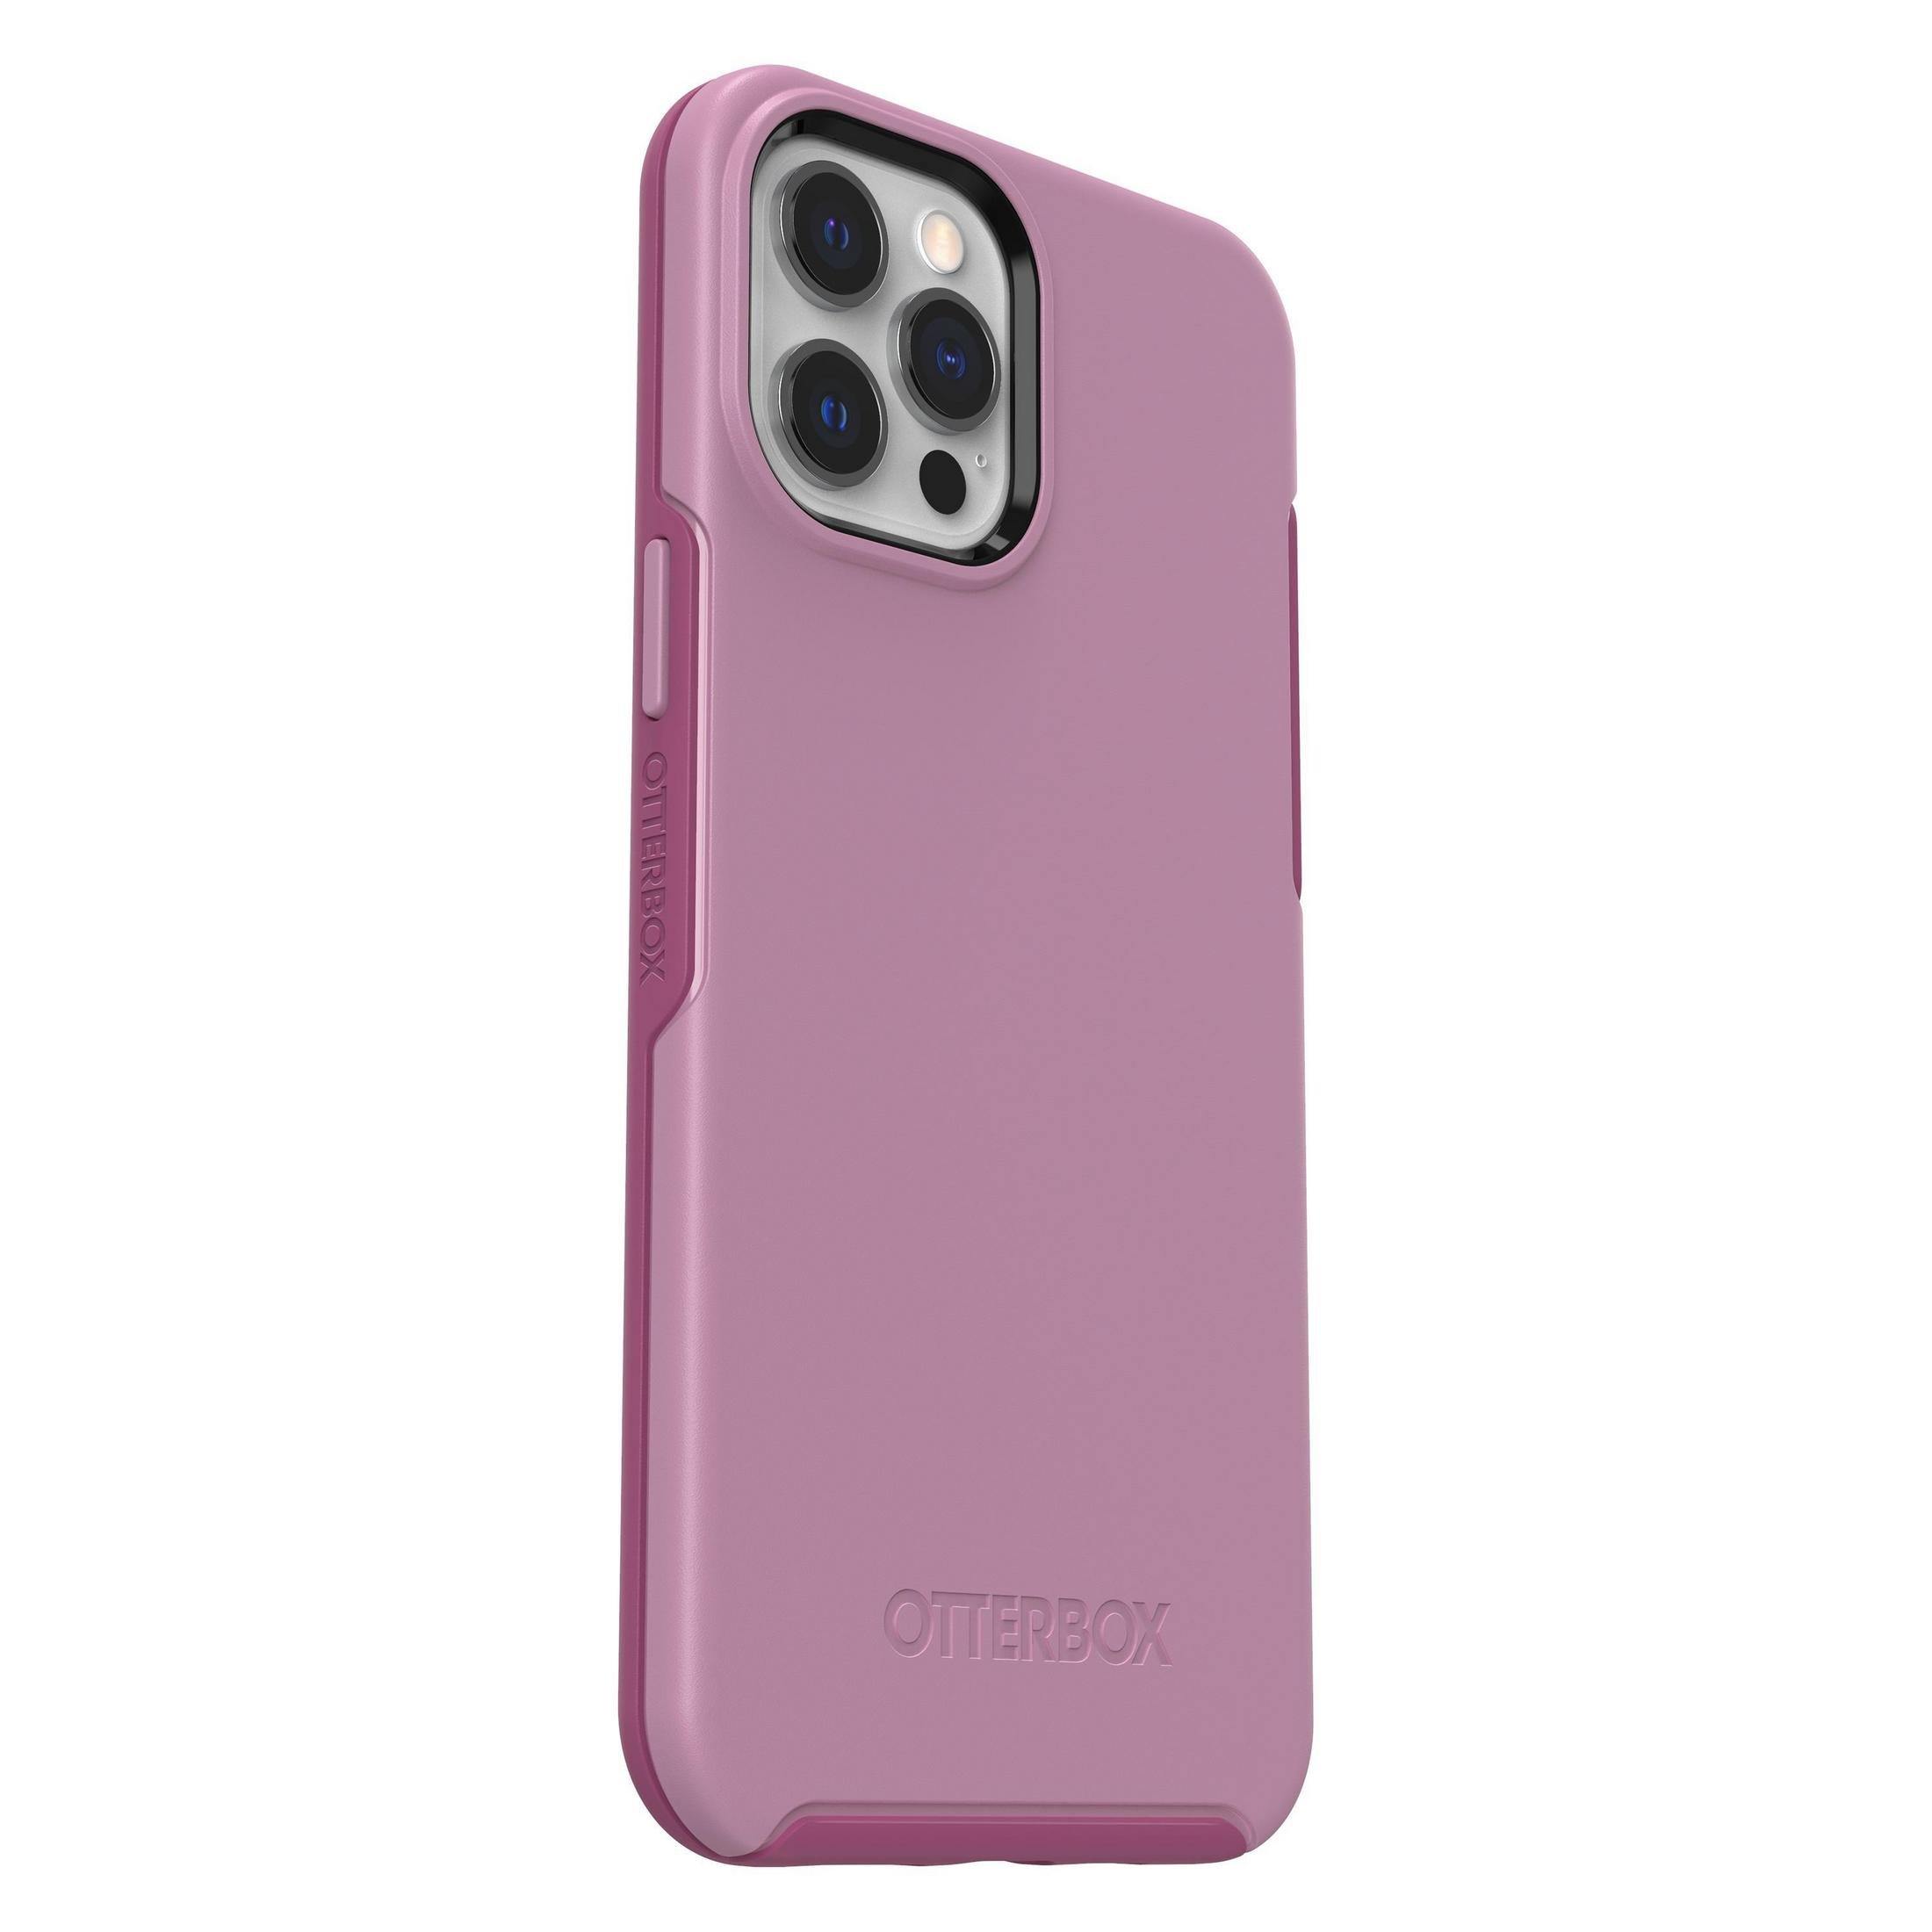 iPhone PINK, IP Pro Backcover, Max, MAX 12 CAKE OTTERBOX 77-65464 PRO SYMMETRY Apple, 12 POP Pink